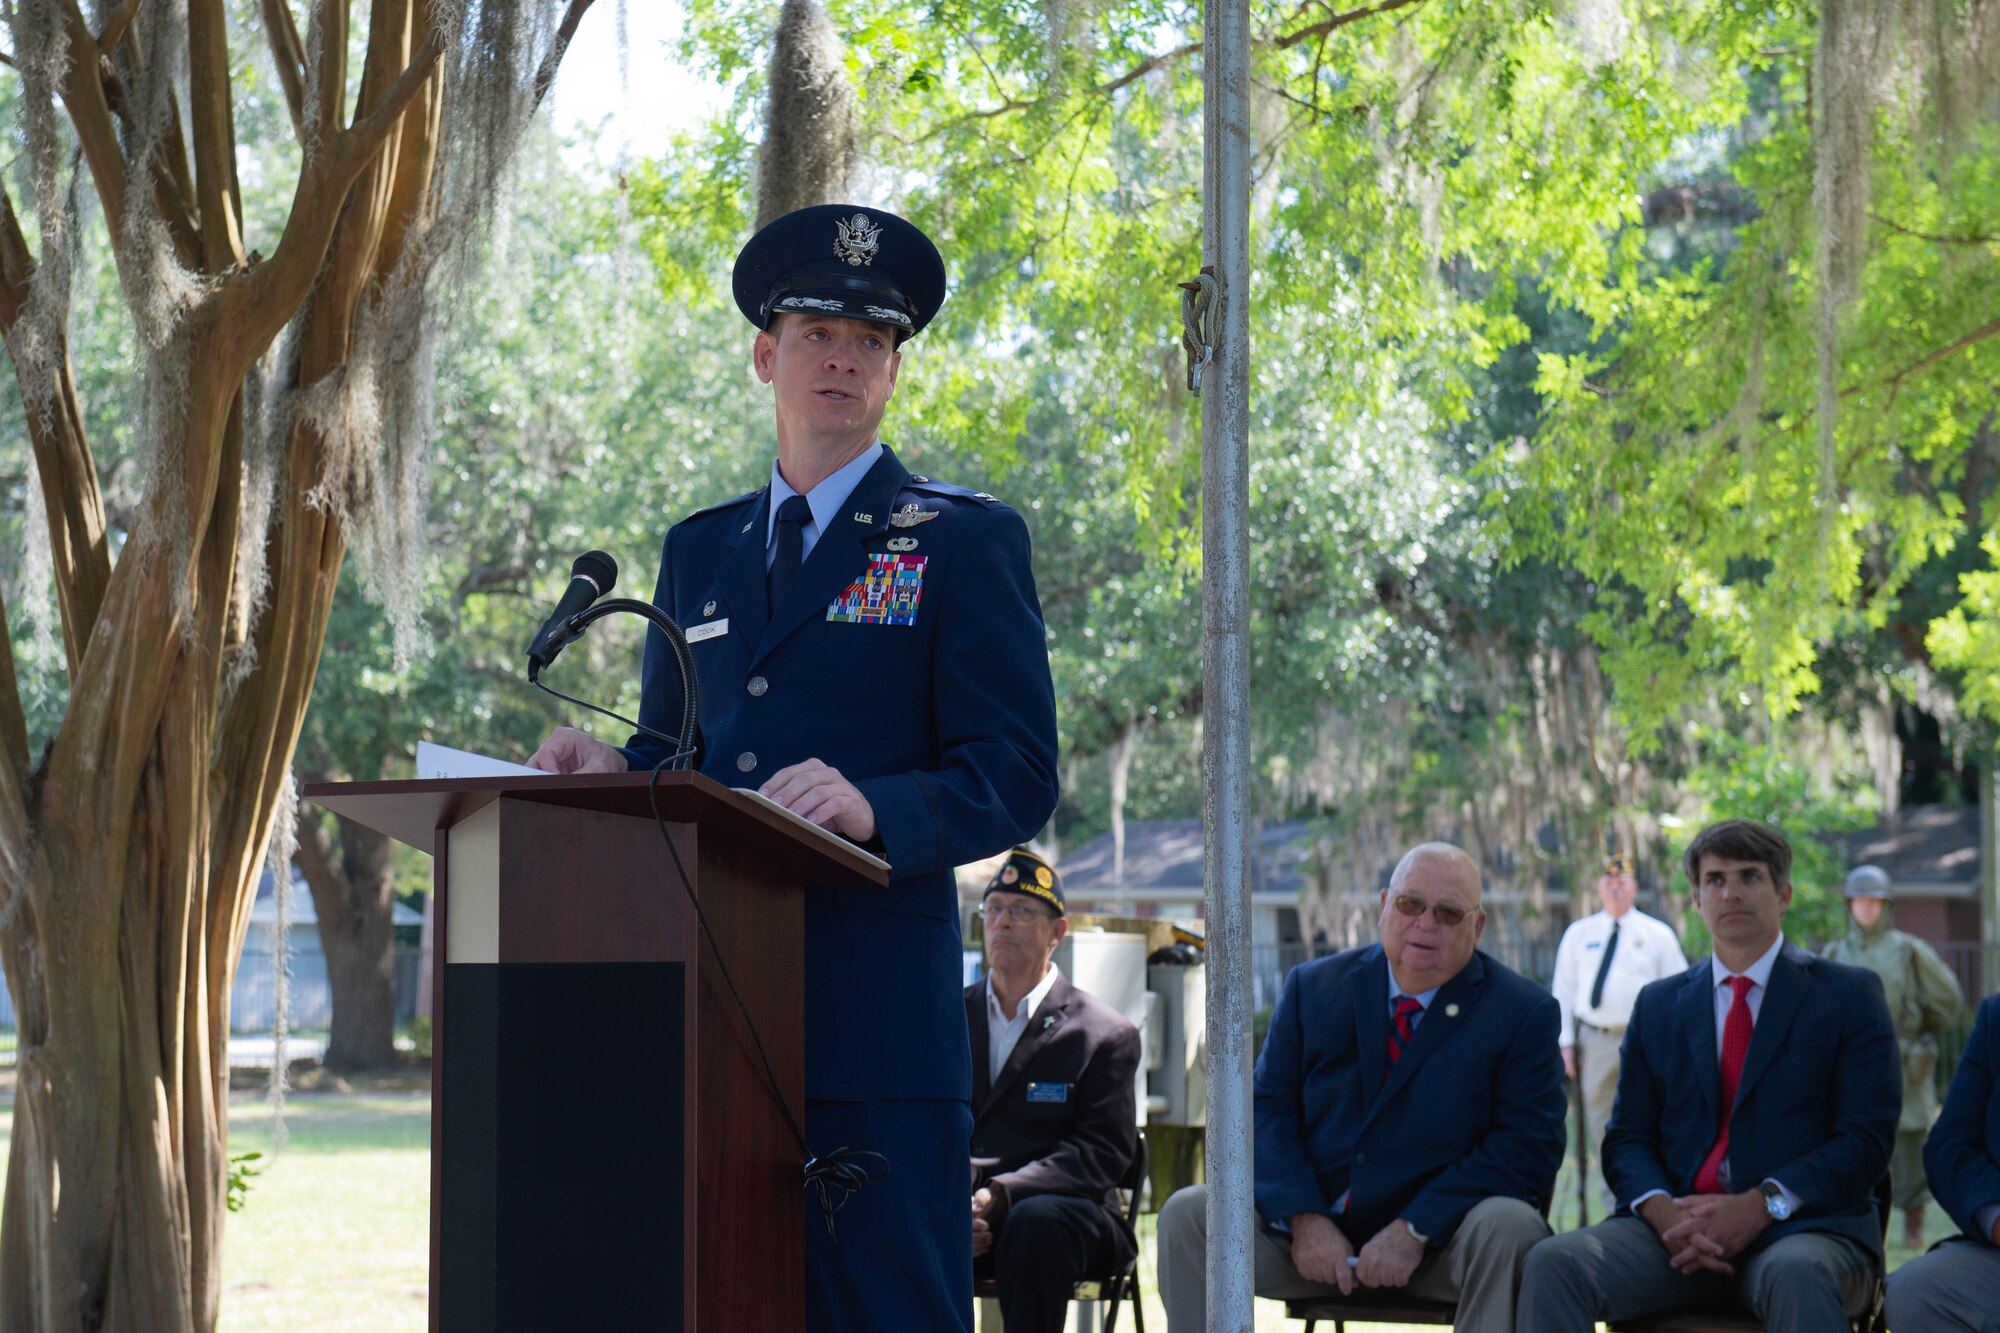 A photo of the 23d Wing commander speaking at a podium